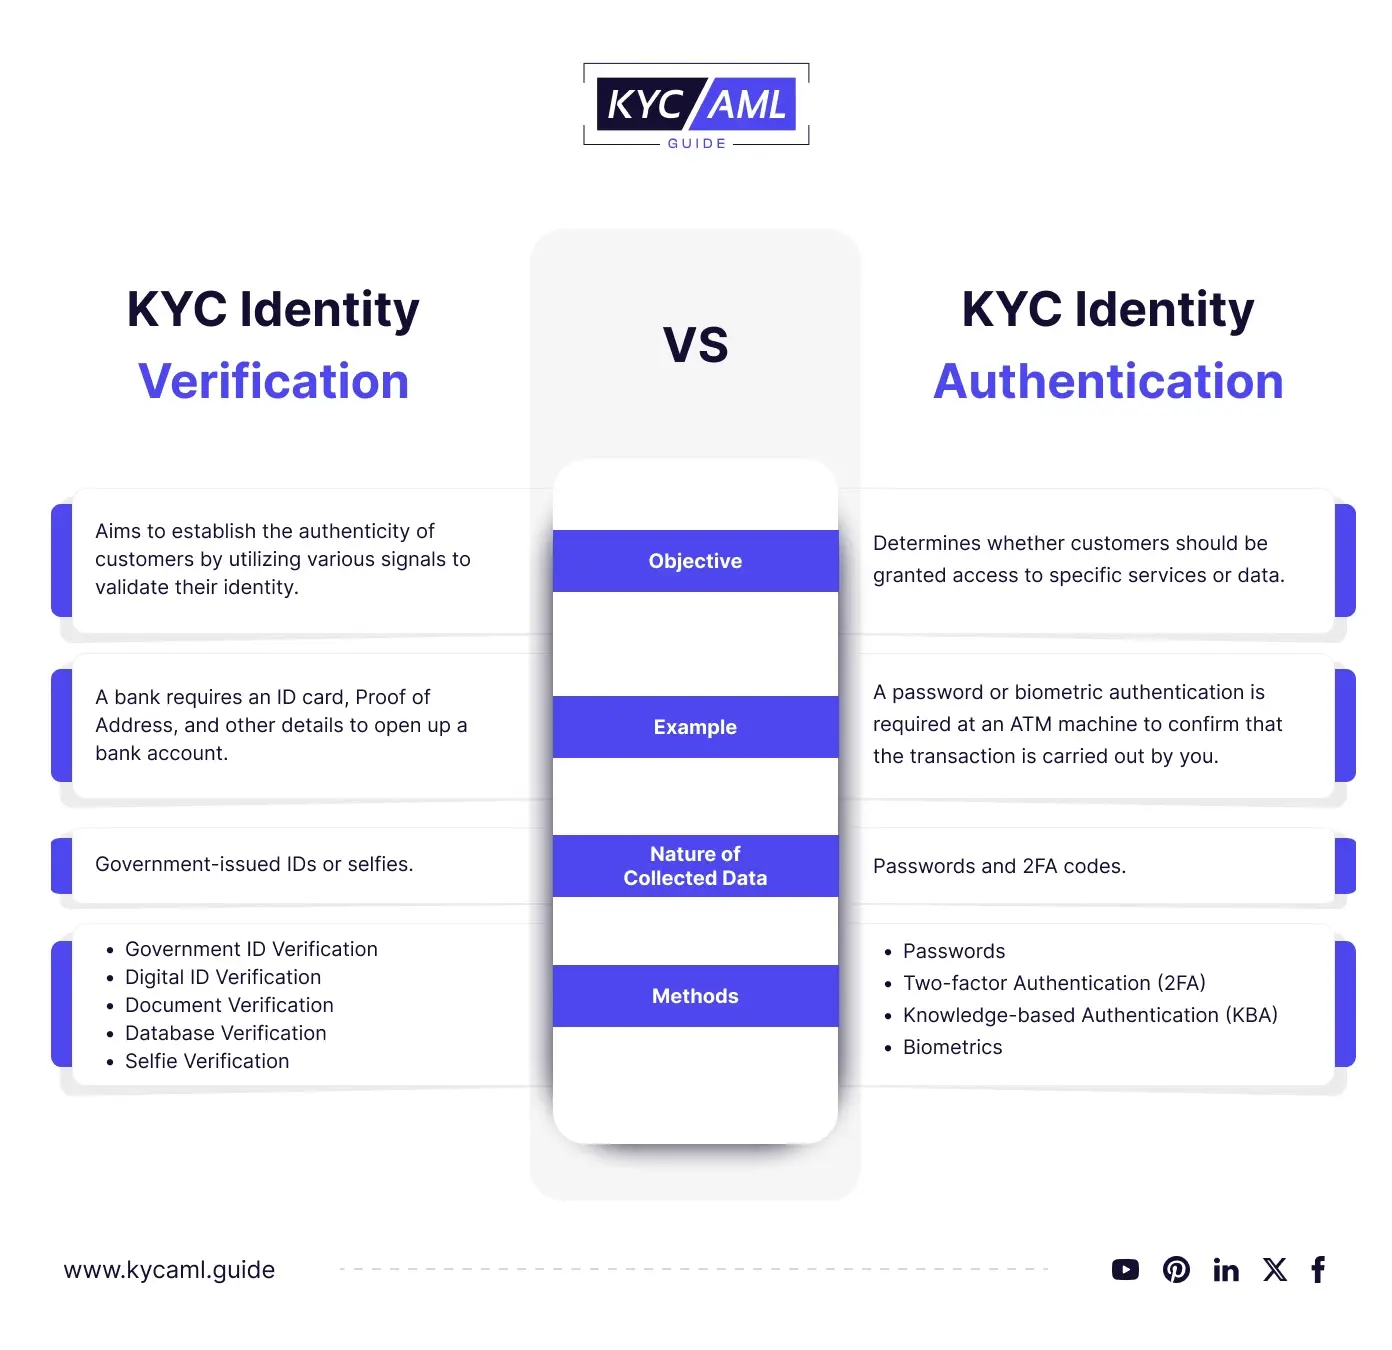 Comparison of KYC Identity Verification and Authentication